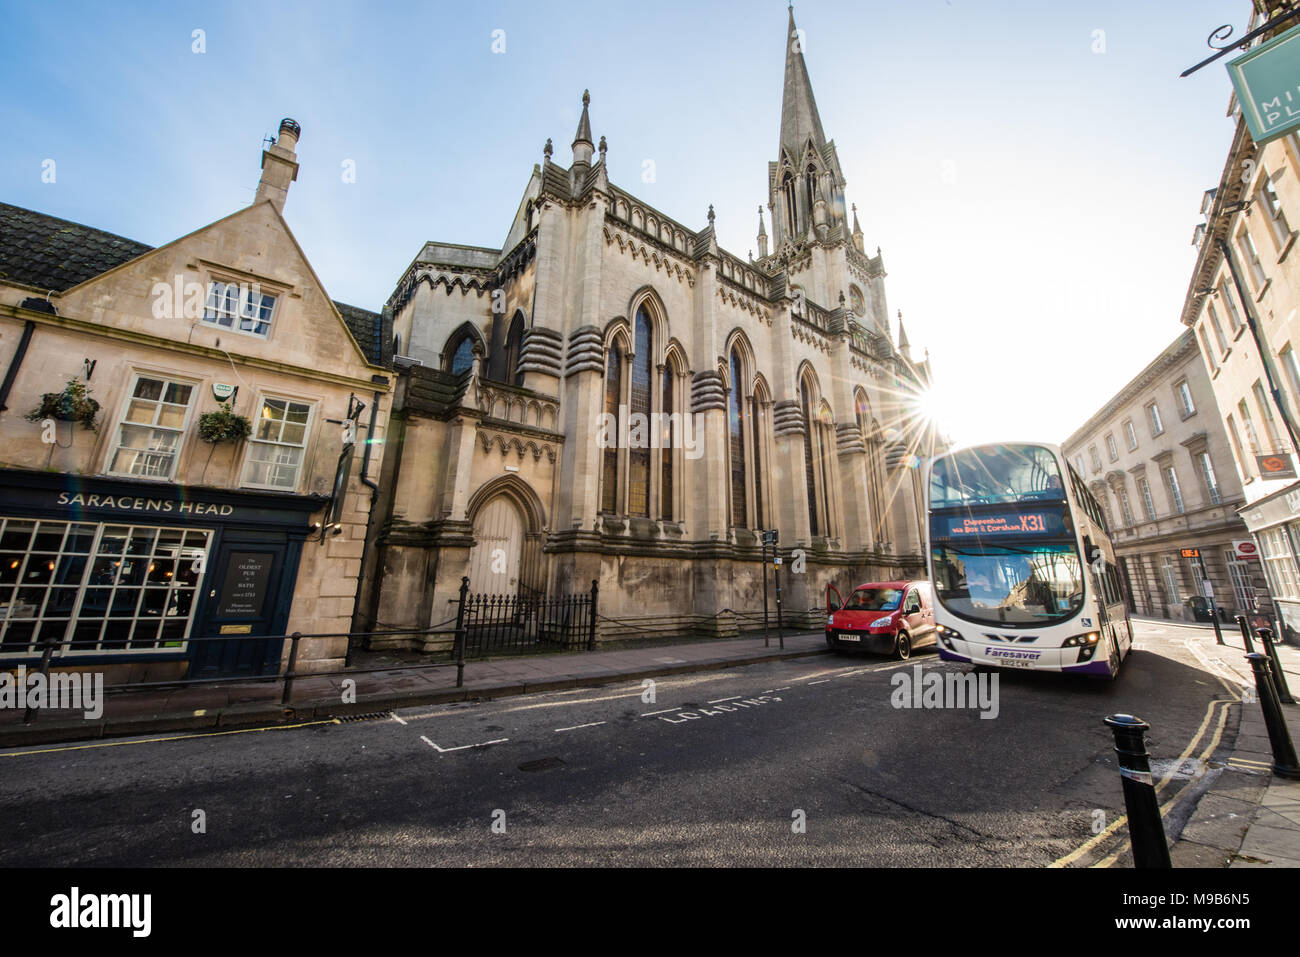 A First bus heads out of historic Broad Street in Bath with a red van in an empty car-free street with St Michael Without Church and the Saracens Head Stock Photo